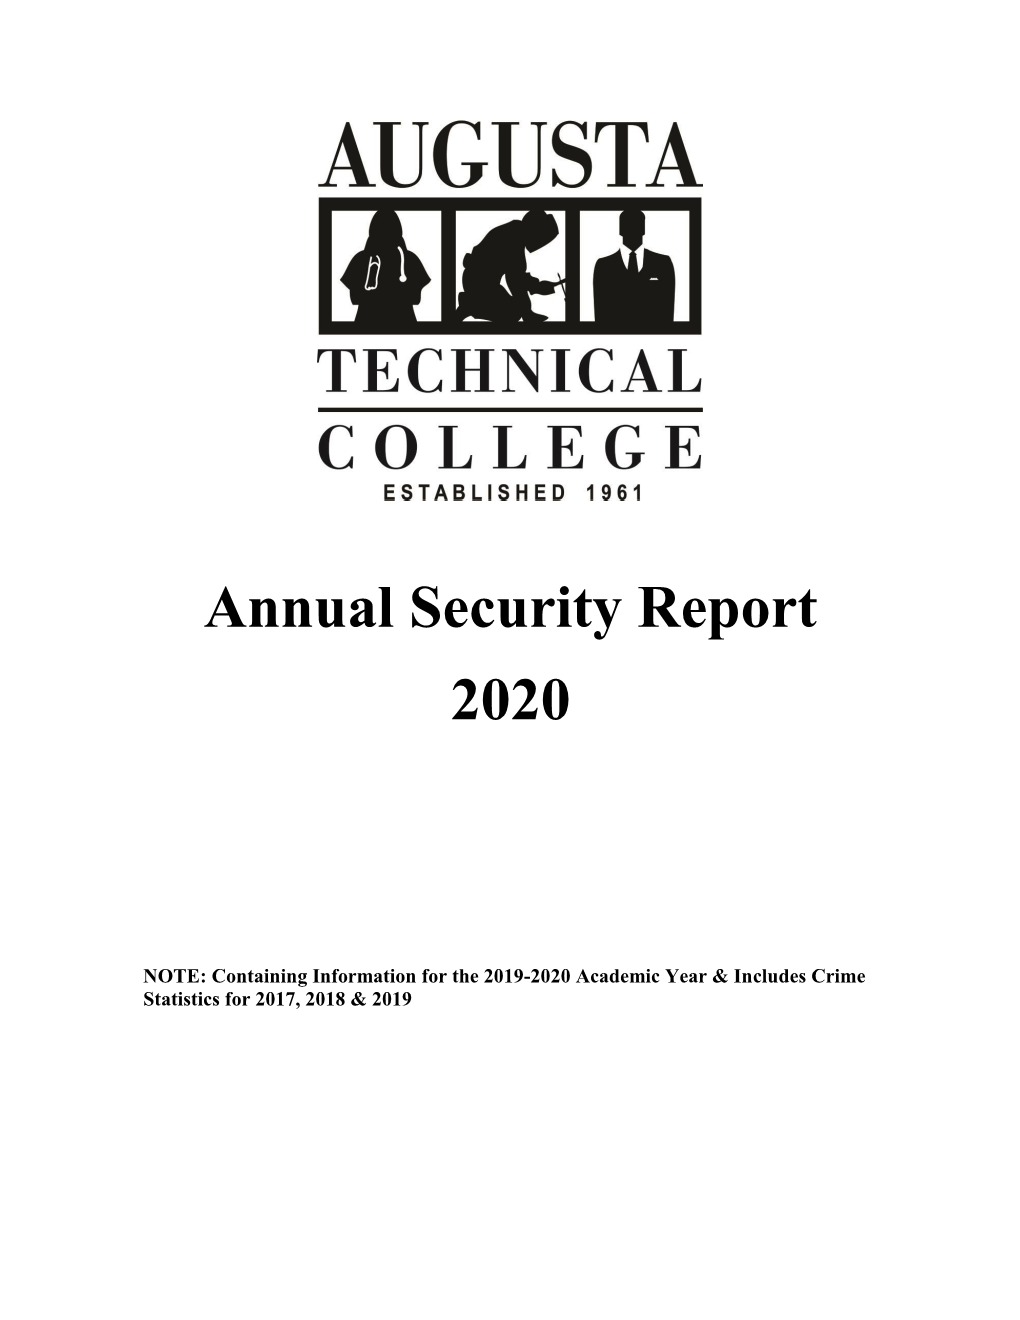 Annual Security Report 2020